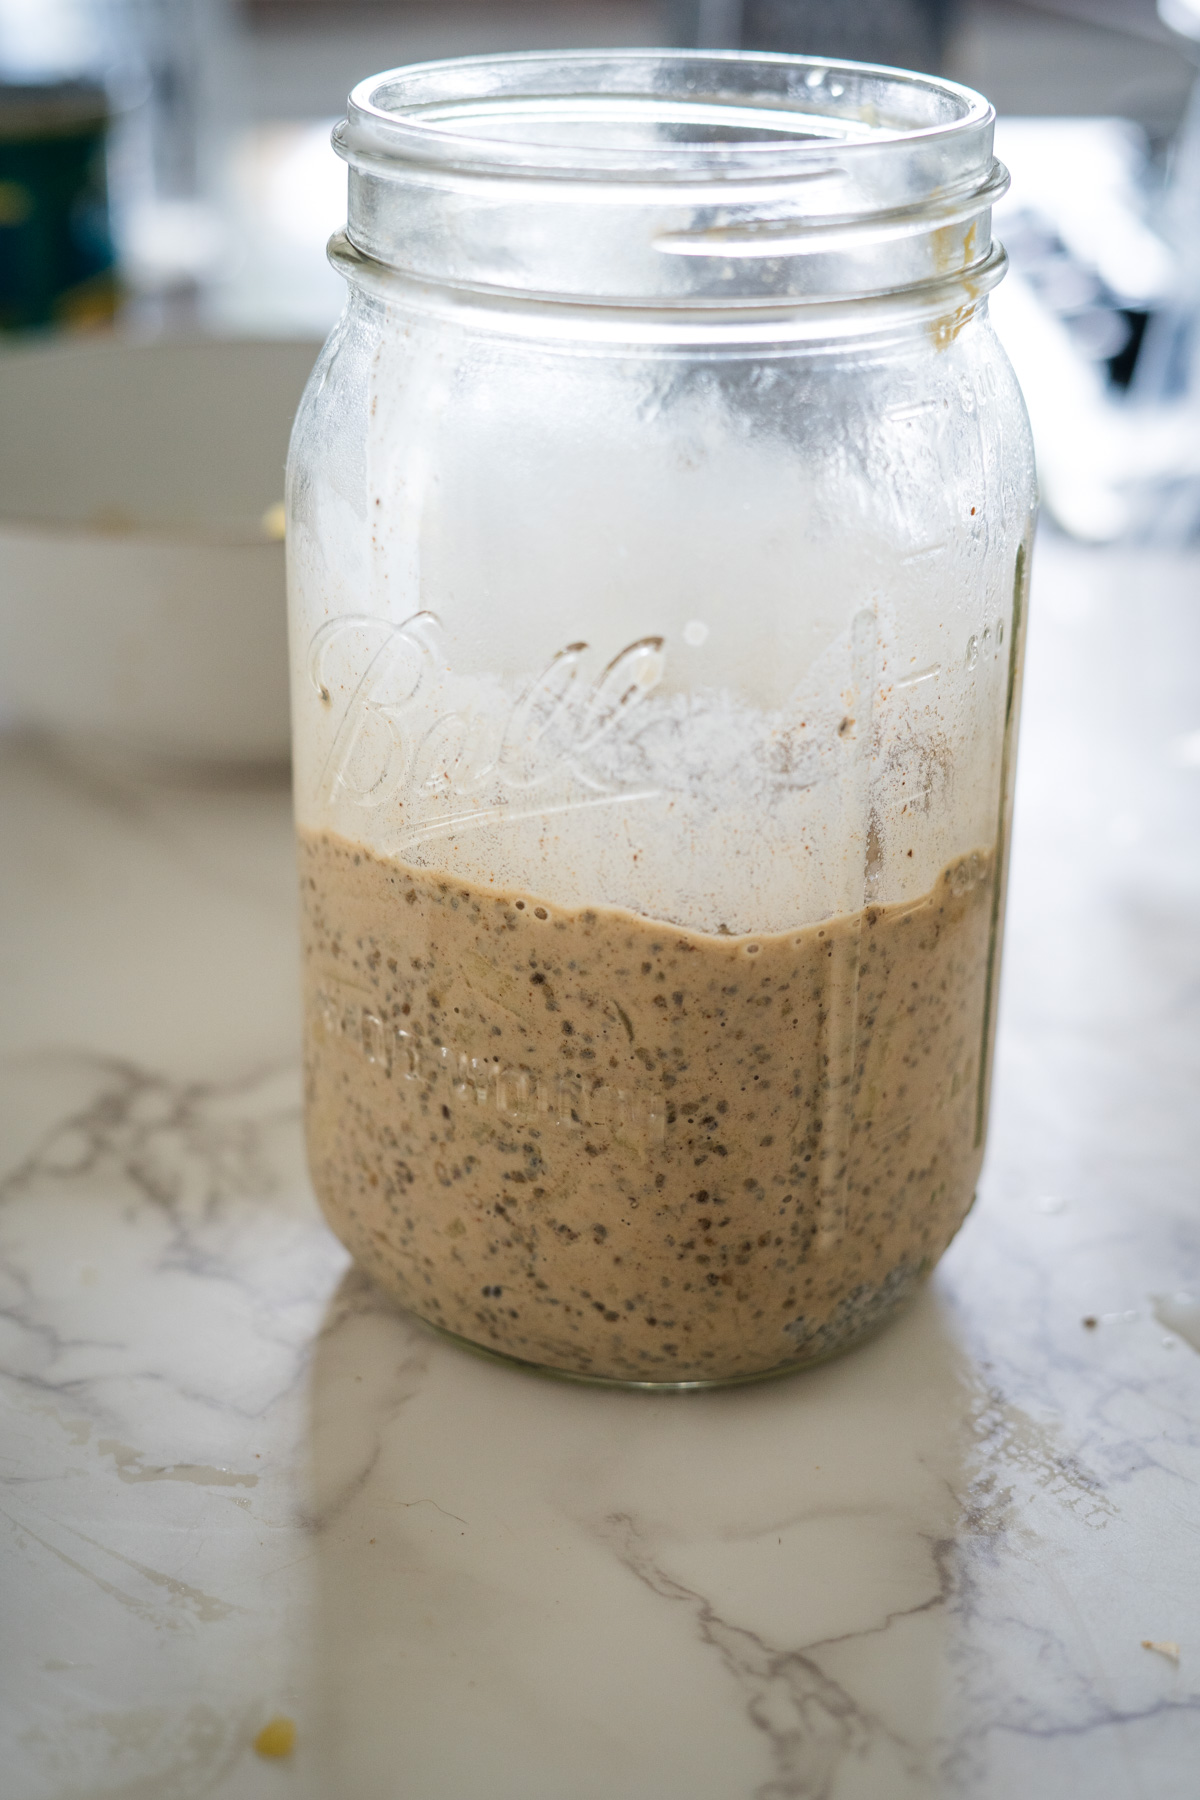 A jar filled with a chia mixture on a counter.